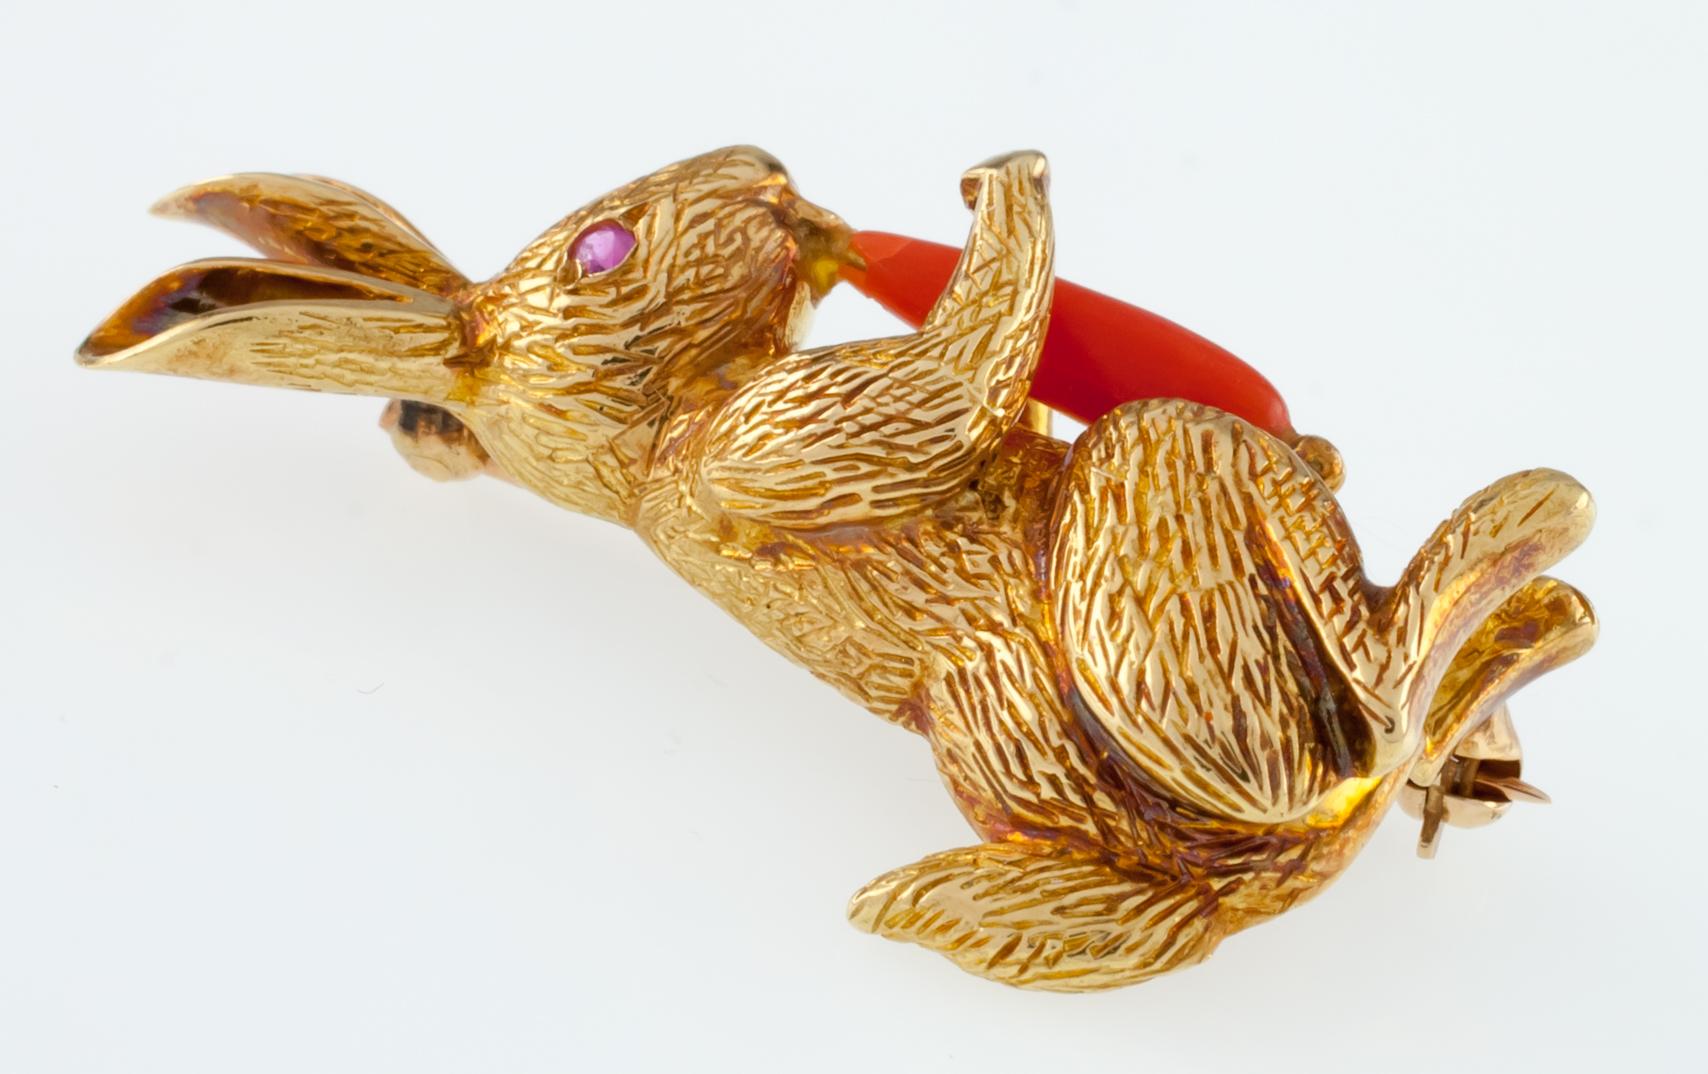 Gorgeous Figural Brooch by Tiffany & Co.
Features a Bunny Holding and Eating a Carrot
Pink Tourmaline Eye
Coral Carrot
Length of Brooch = 43 mm
Width of Brooch = 23 mm
Total Mass = 14.4 grams
Gorgeous Piece!
Piece is in Good Condition. Shows Few